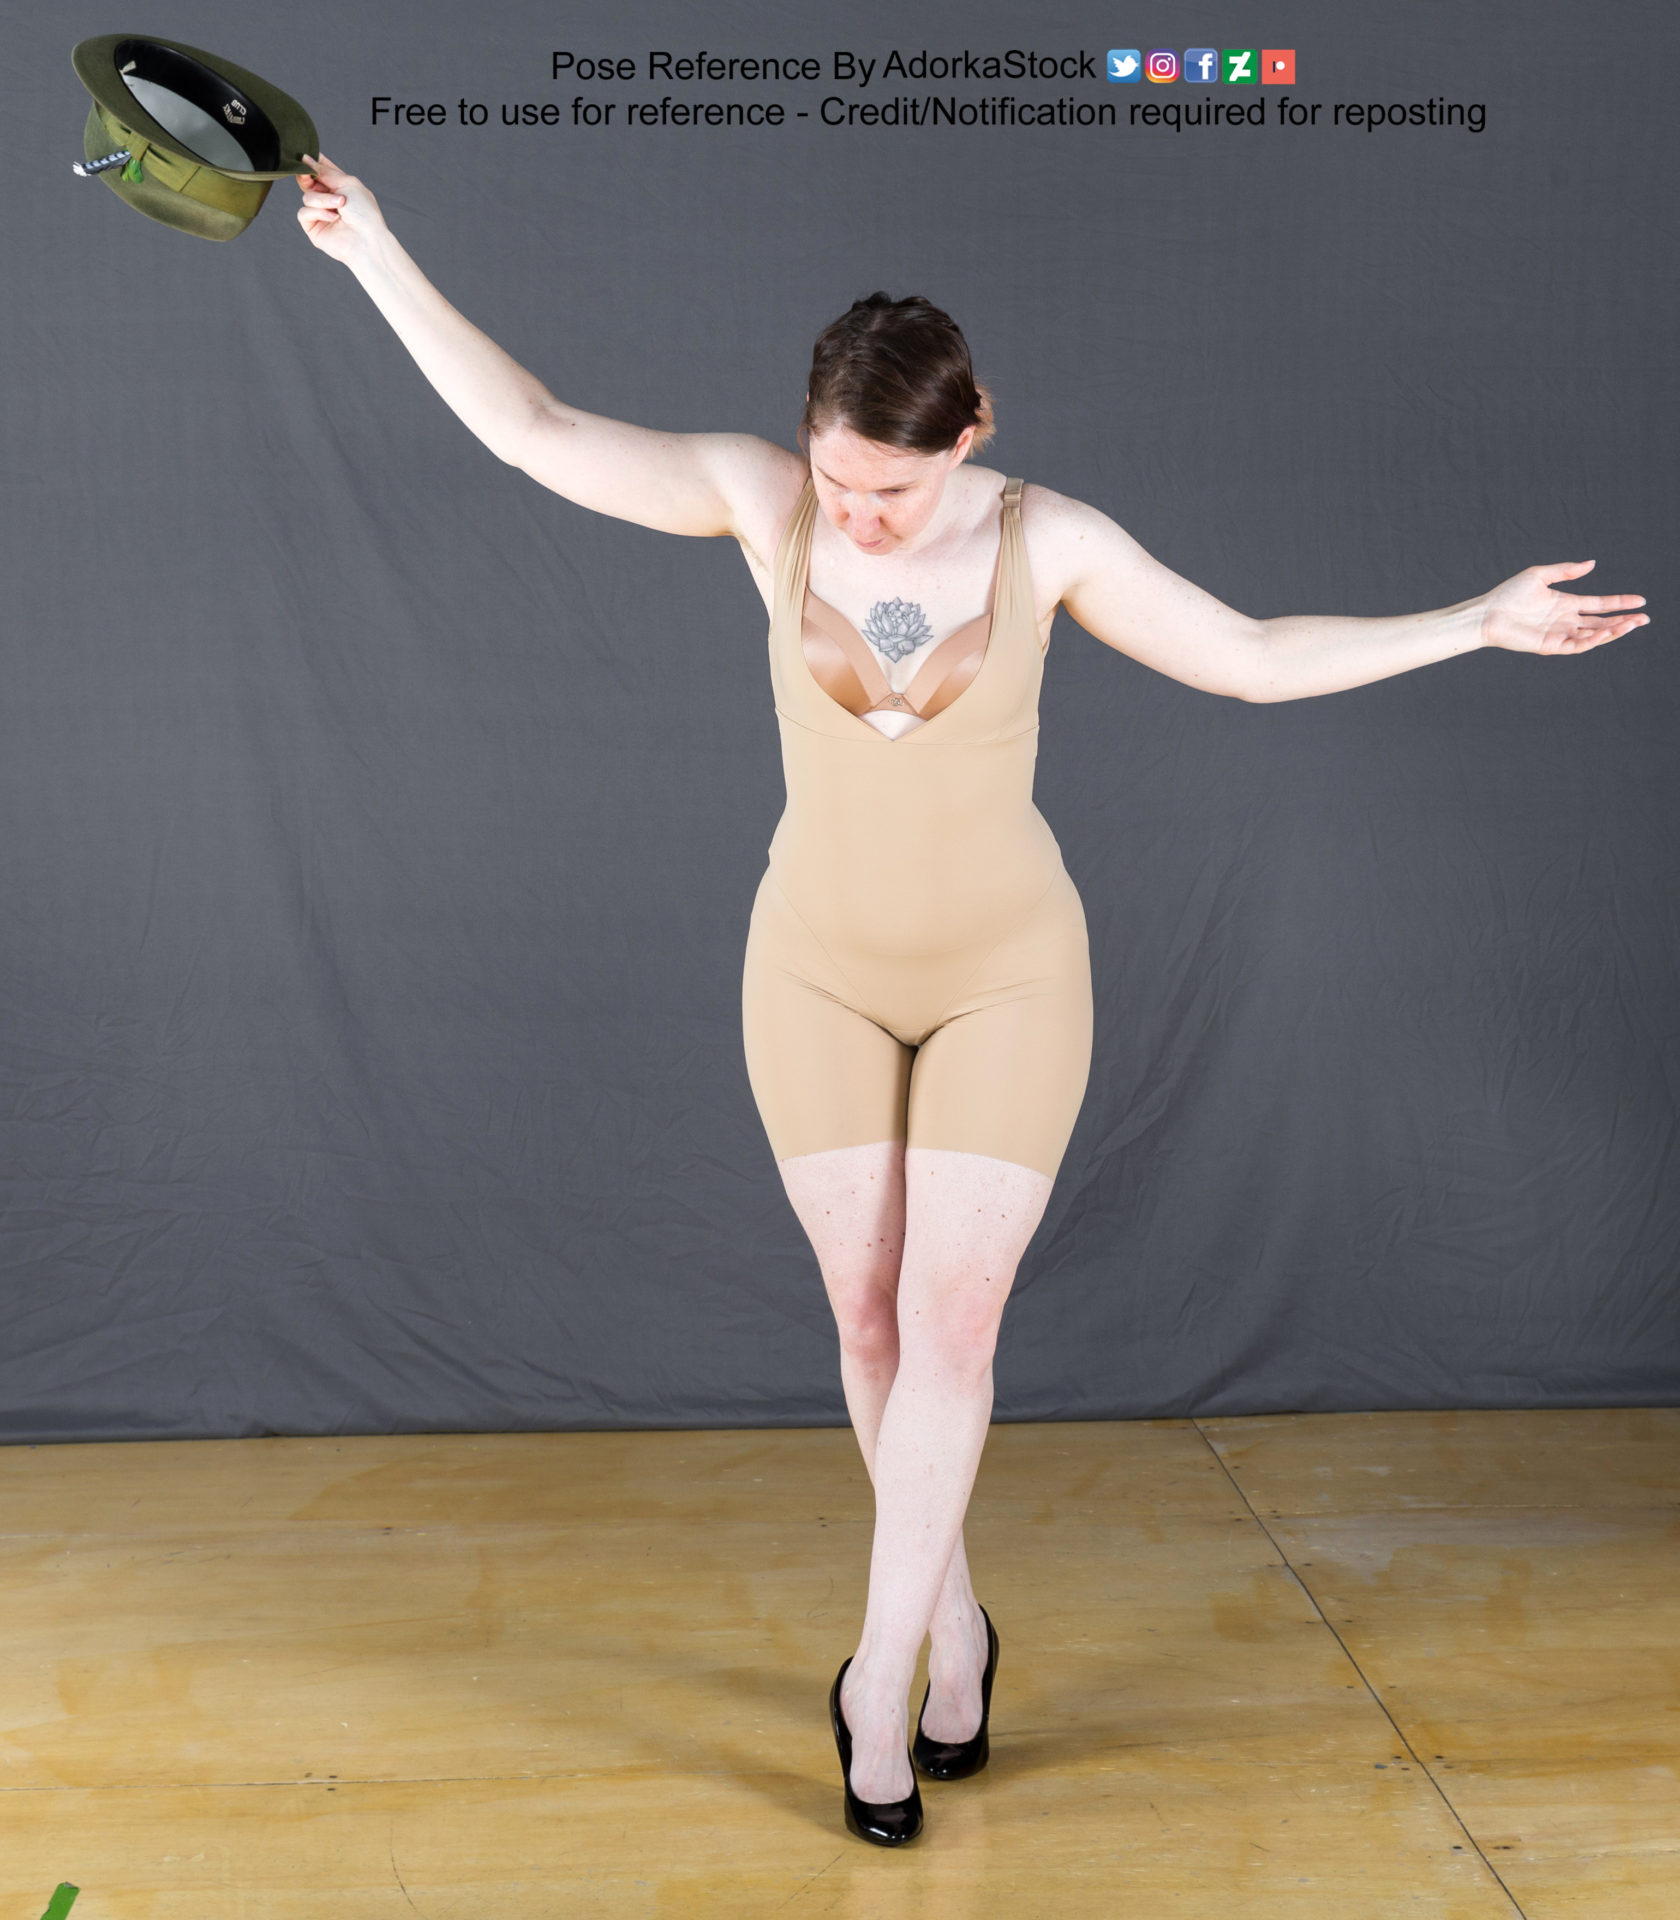 Pose reference of a thin, white, female model wearing high heels and form fitting clothing, bowing slighting from the upper body with right arm uplifted holding a hat and left arm out with an open gesture